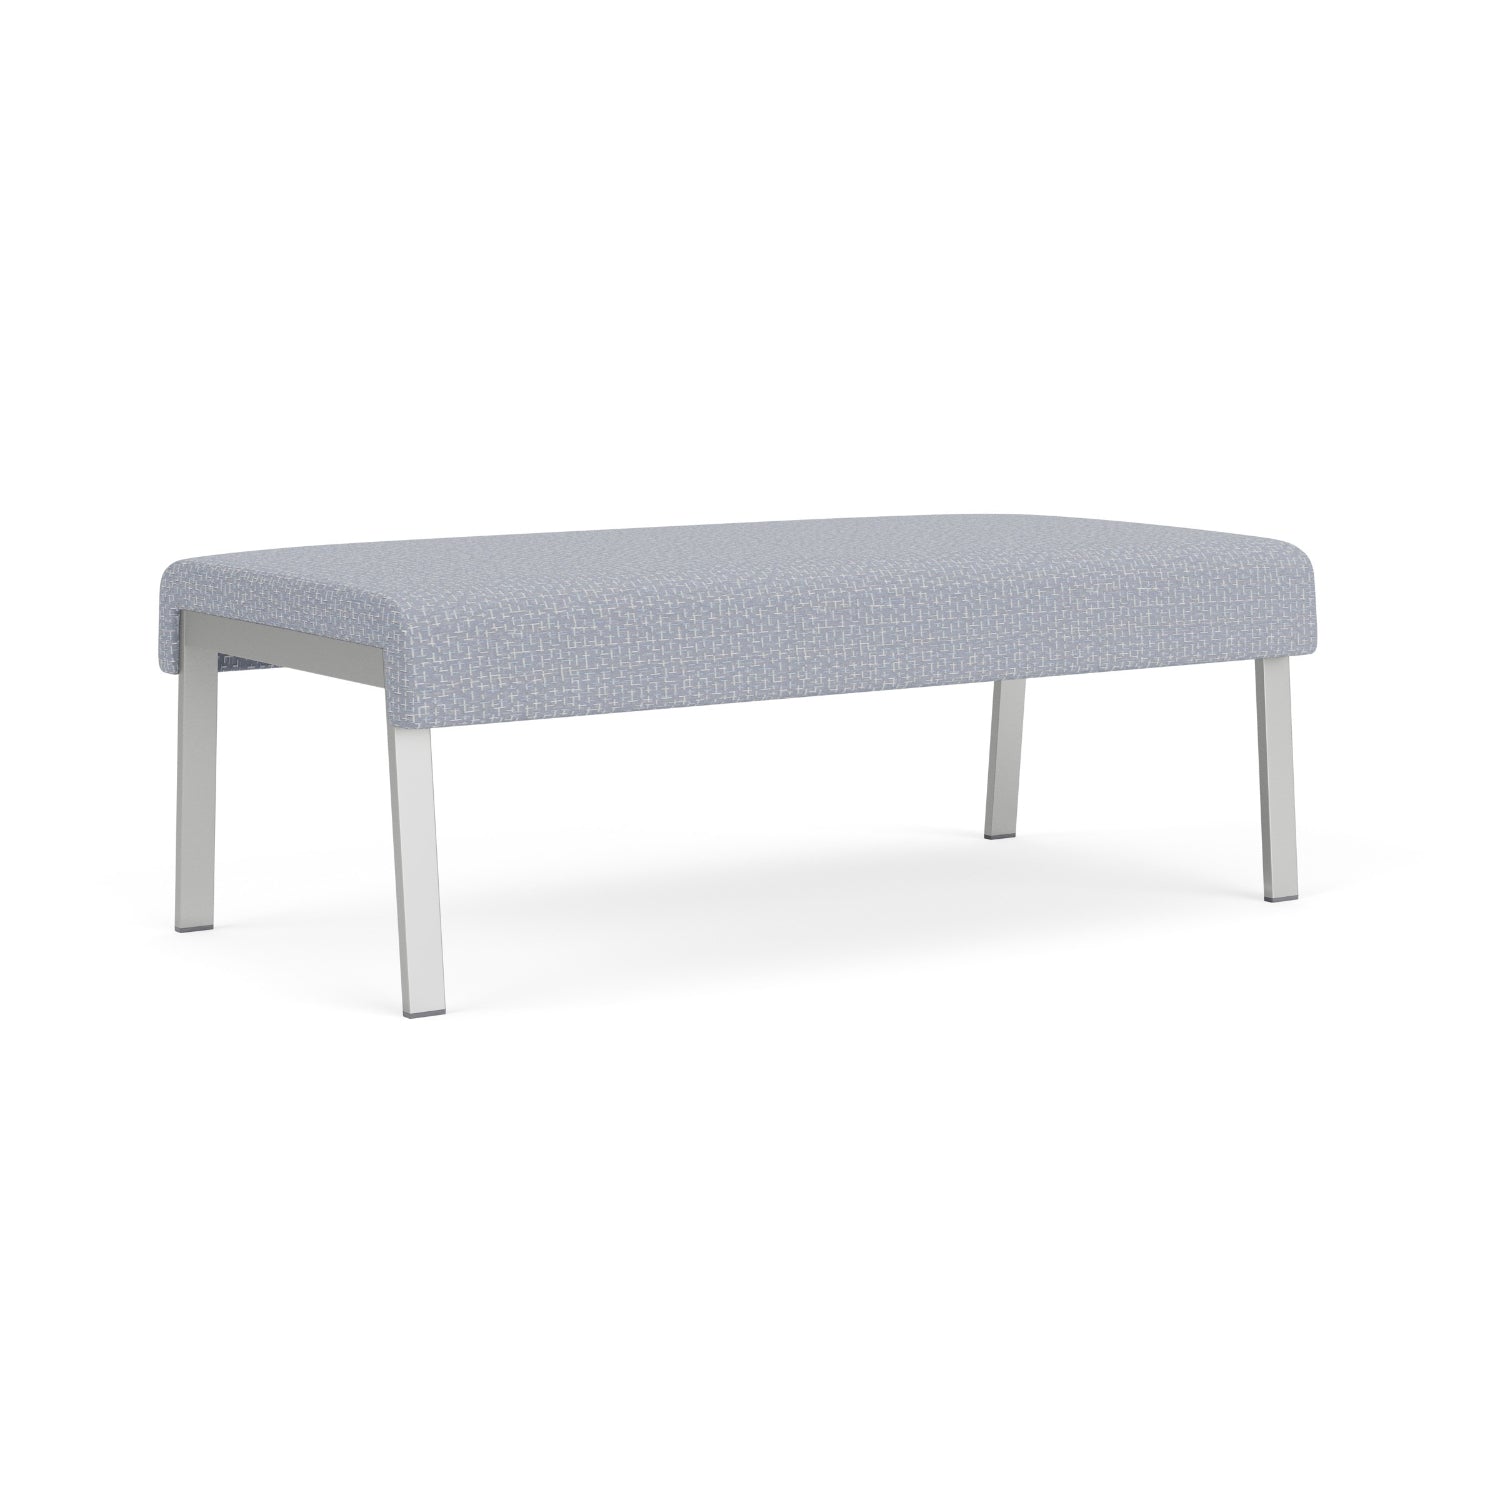 Waterfall Collection Reception Seating, 2-Seat Bench, Leg Base, Designer Fabric Upholstery, FREE SHIPPING